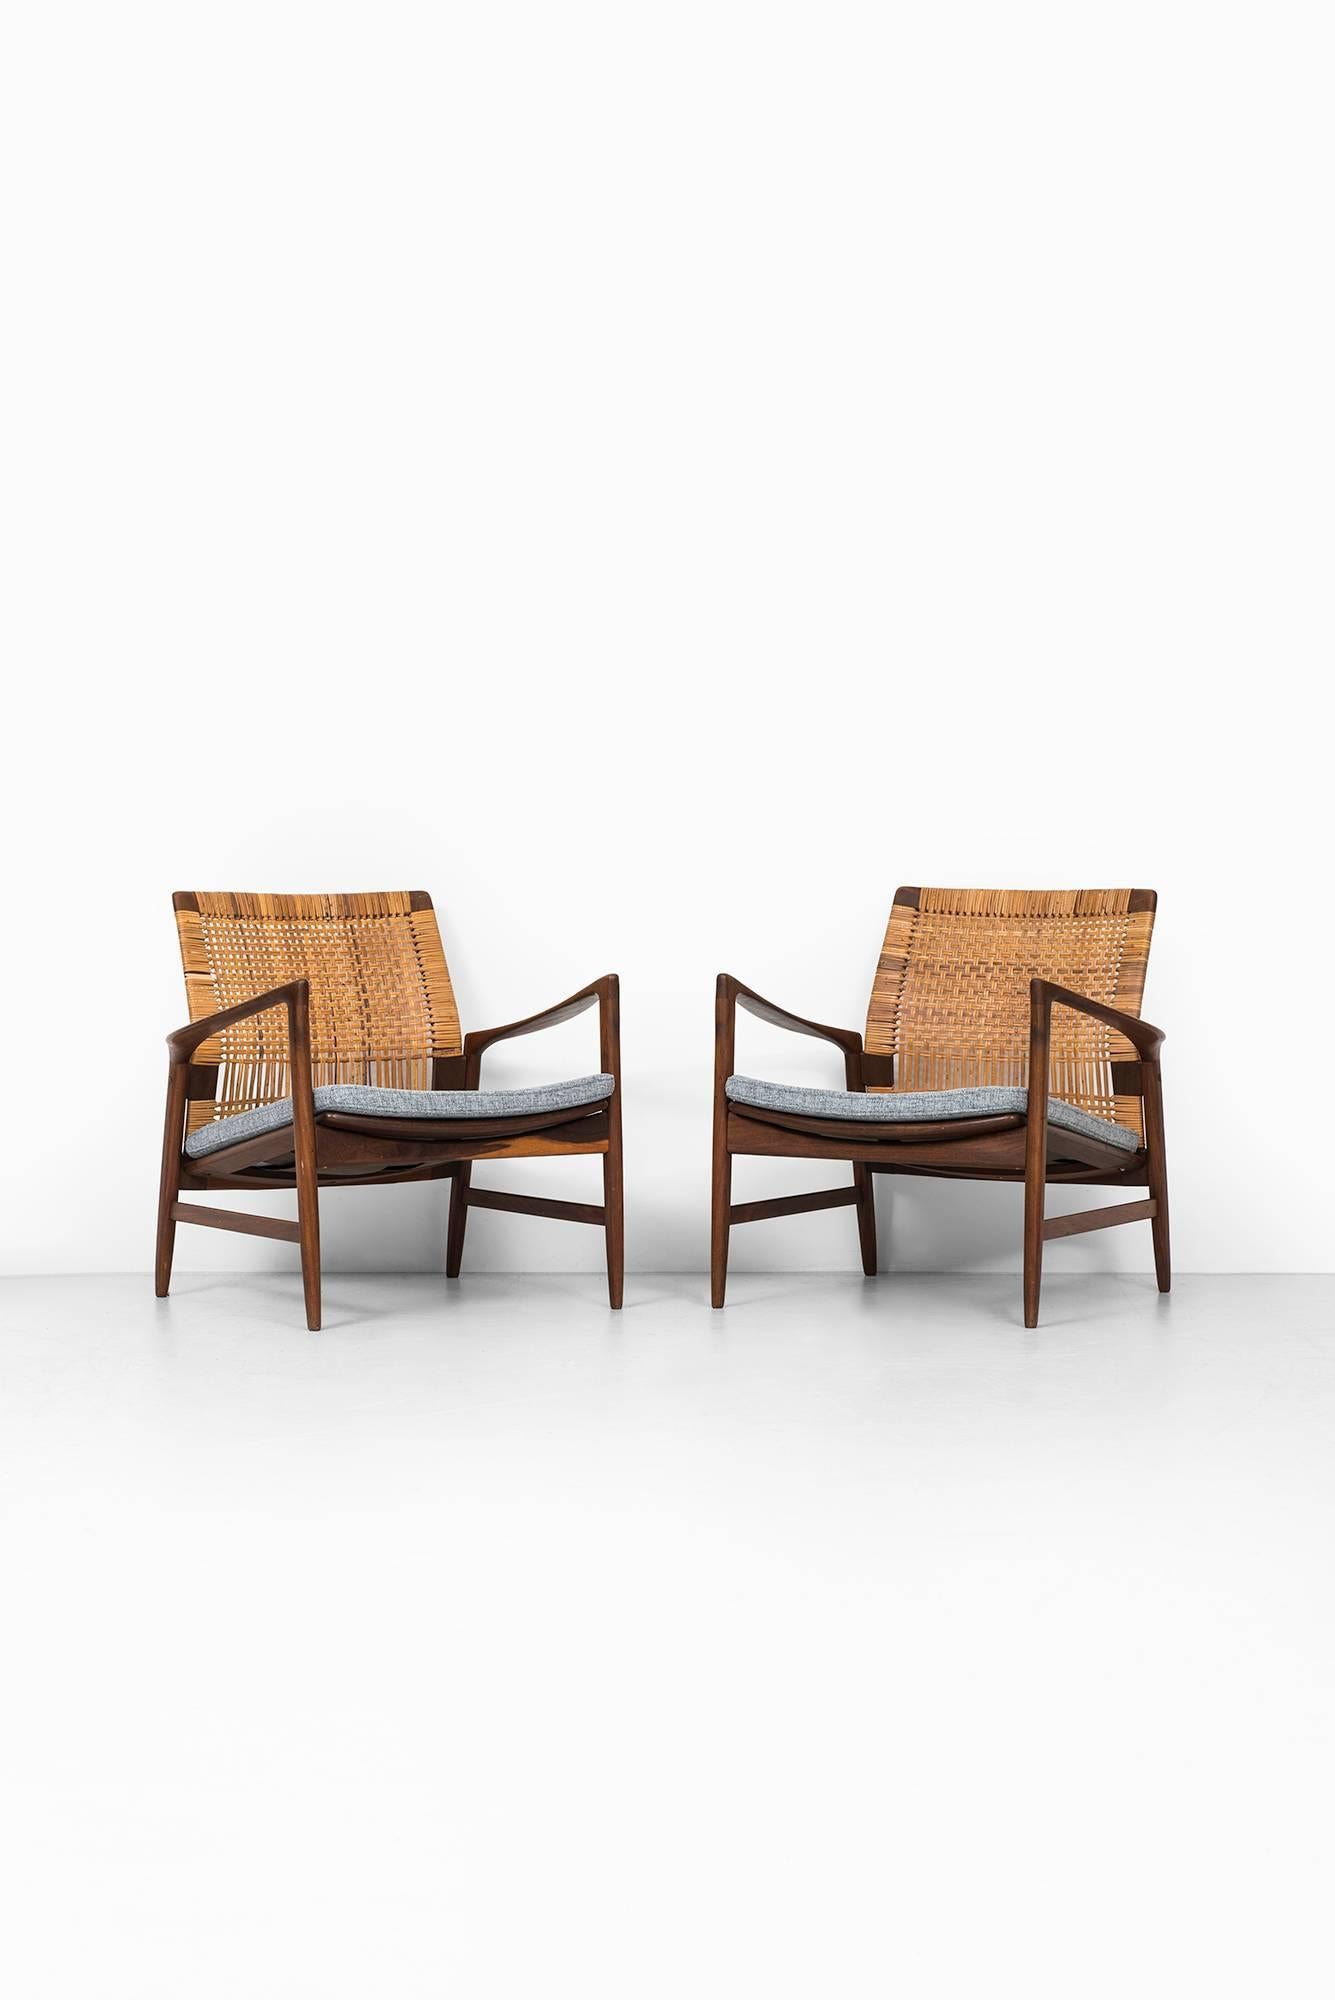 Mid-20th Century Ib Kofod-Larsen Easy Chairs Model Åre by Ope in Sweden